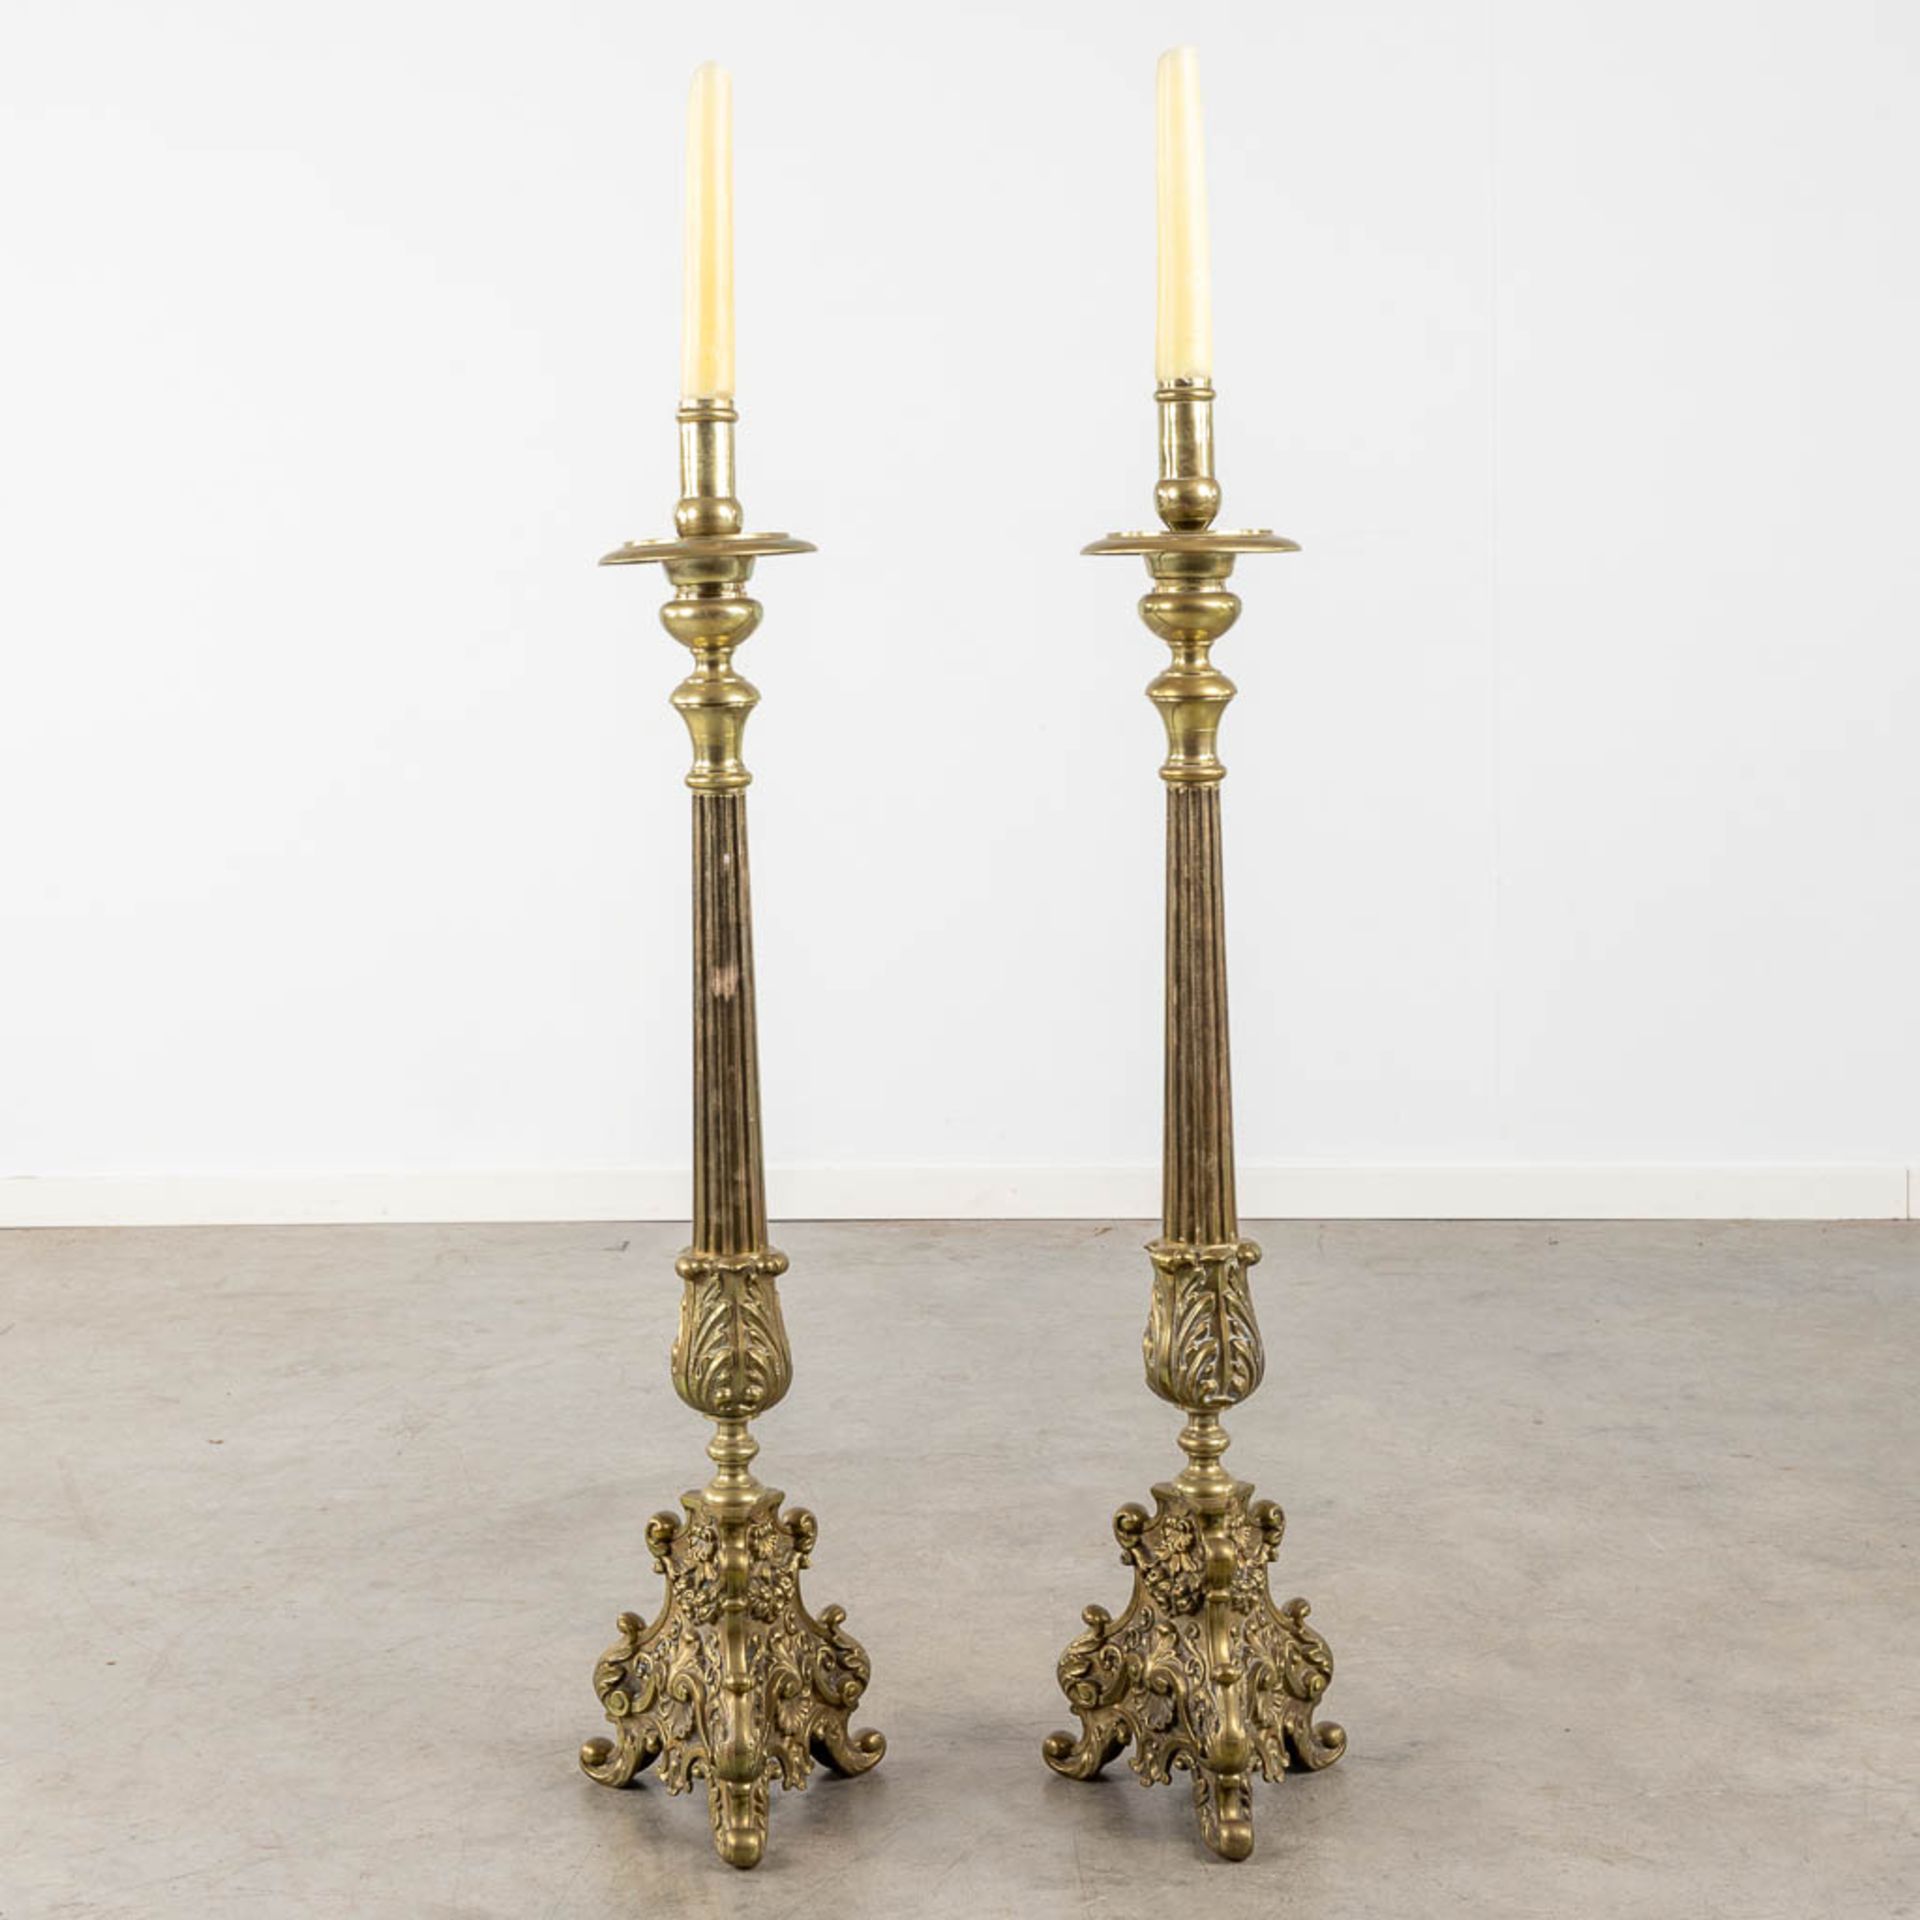 A pair of bronze church candlesticks/candle holders, Louis XV style. Circa 1900. (W:23 x H:105 cm) - Image 4 of 19